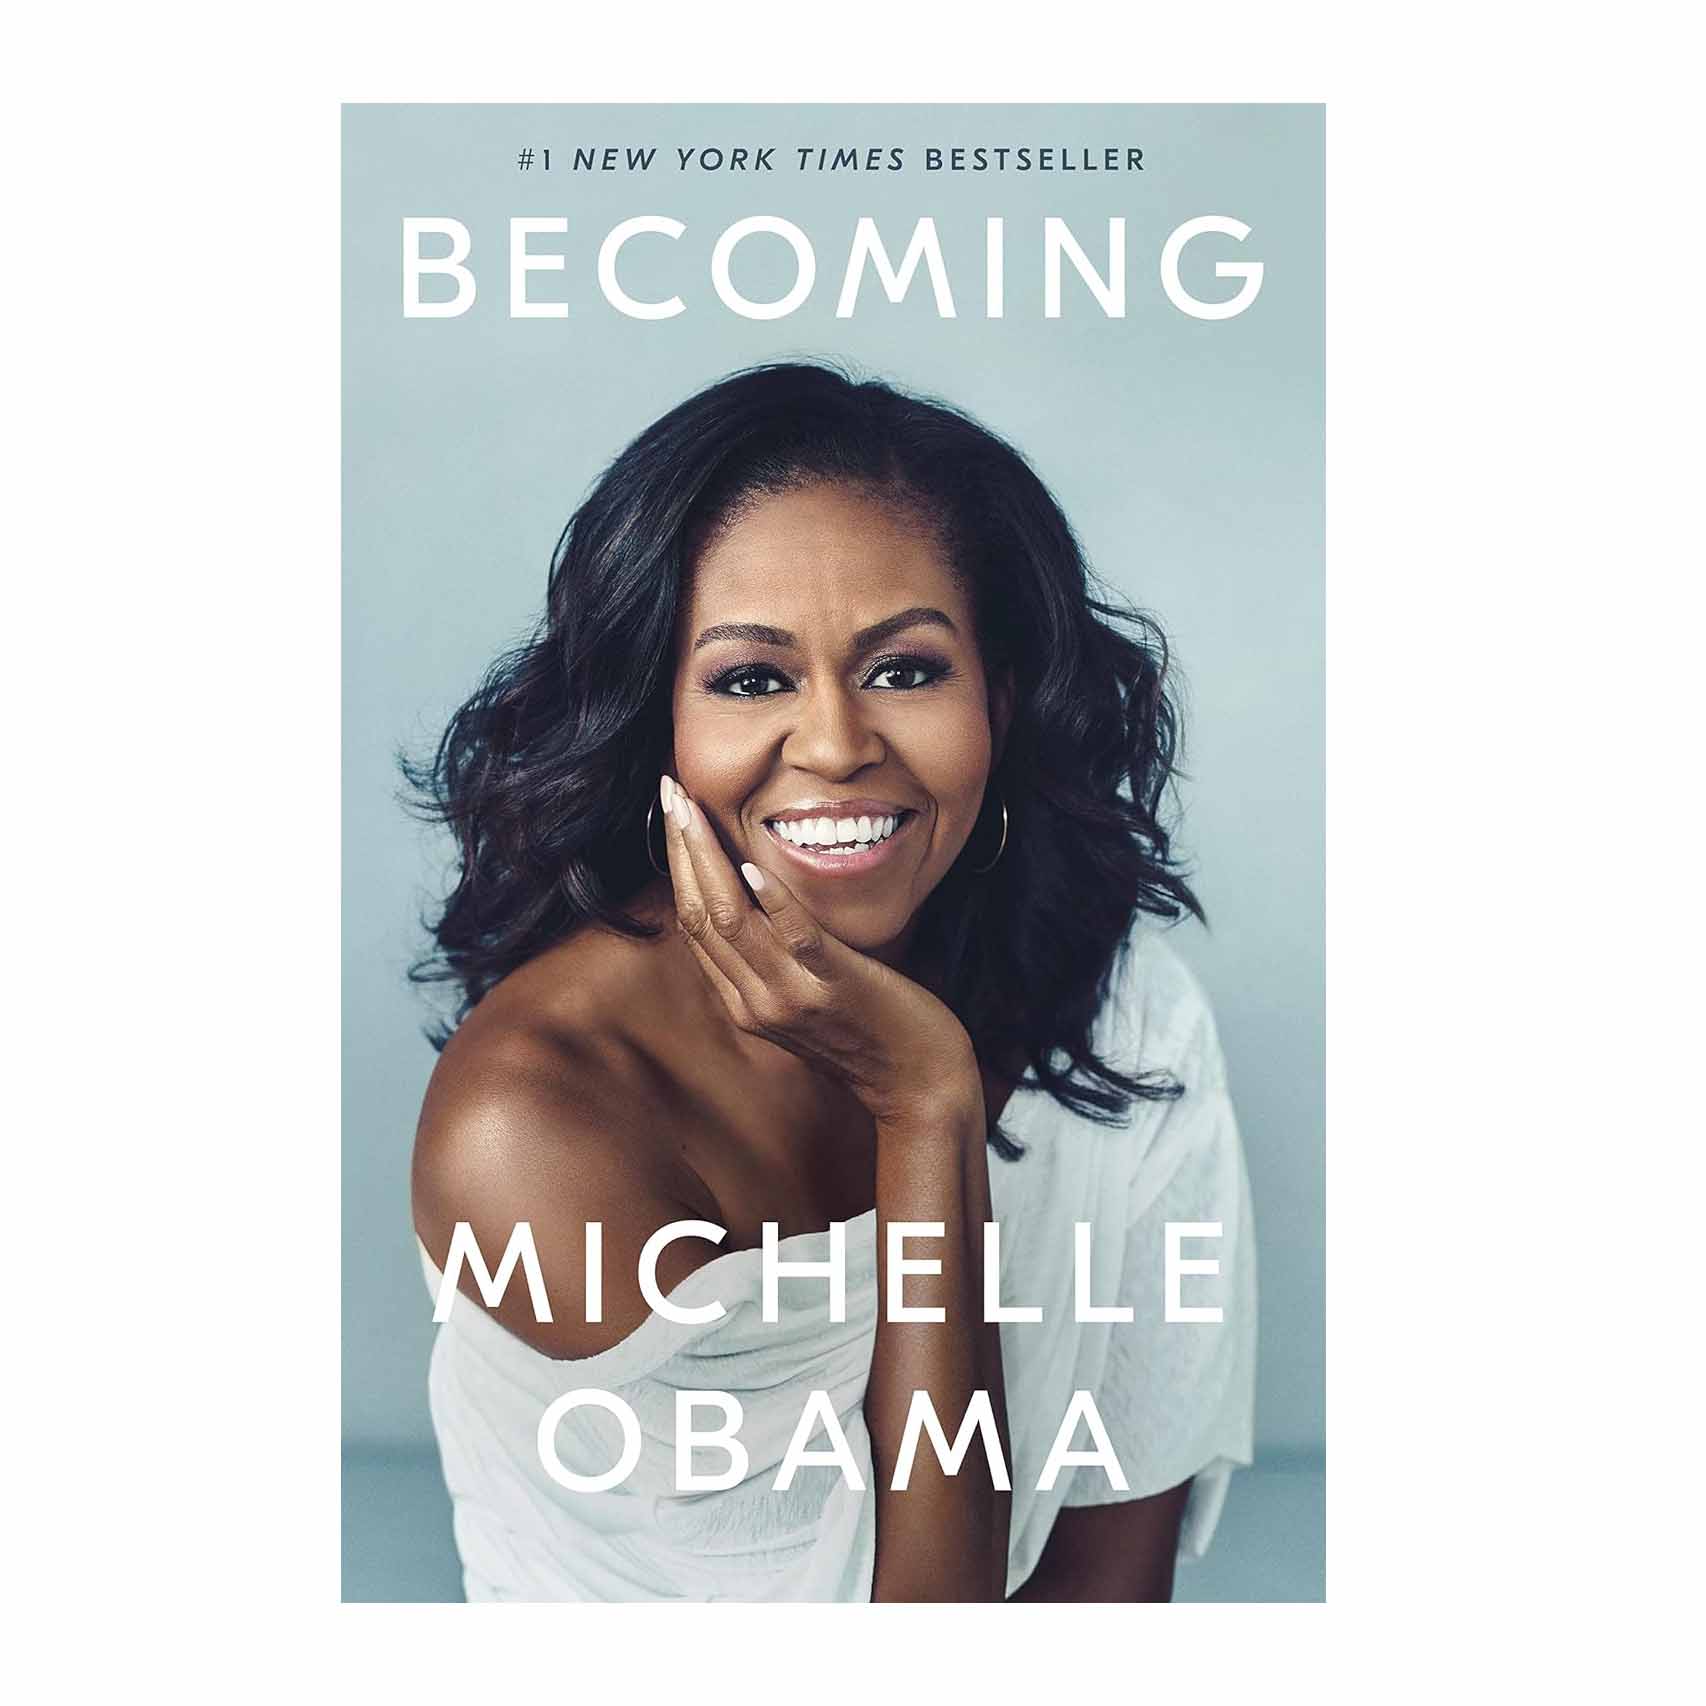 light blue book titled Becoming with a portrait of Michelle Obama 